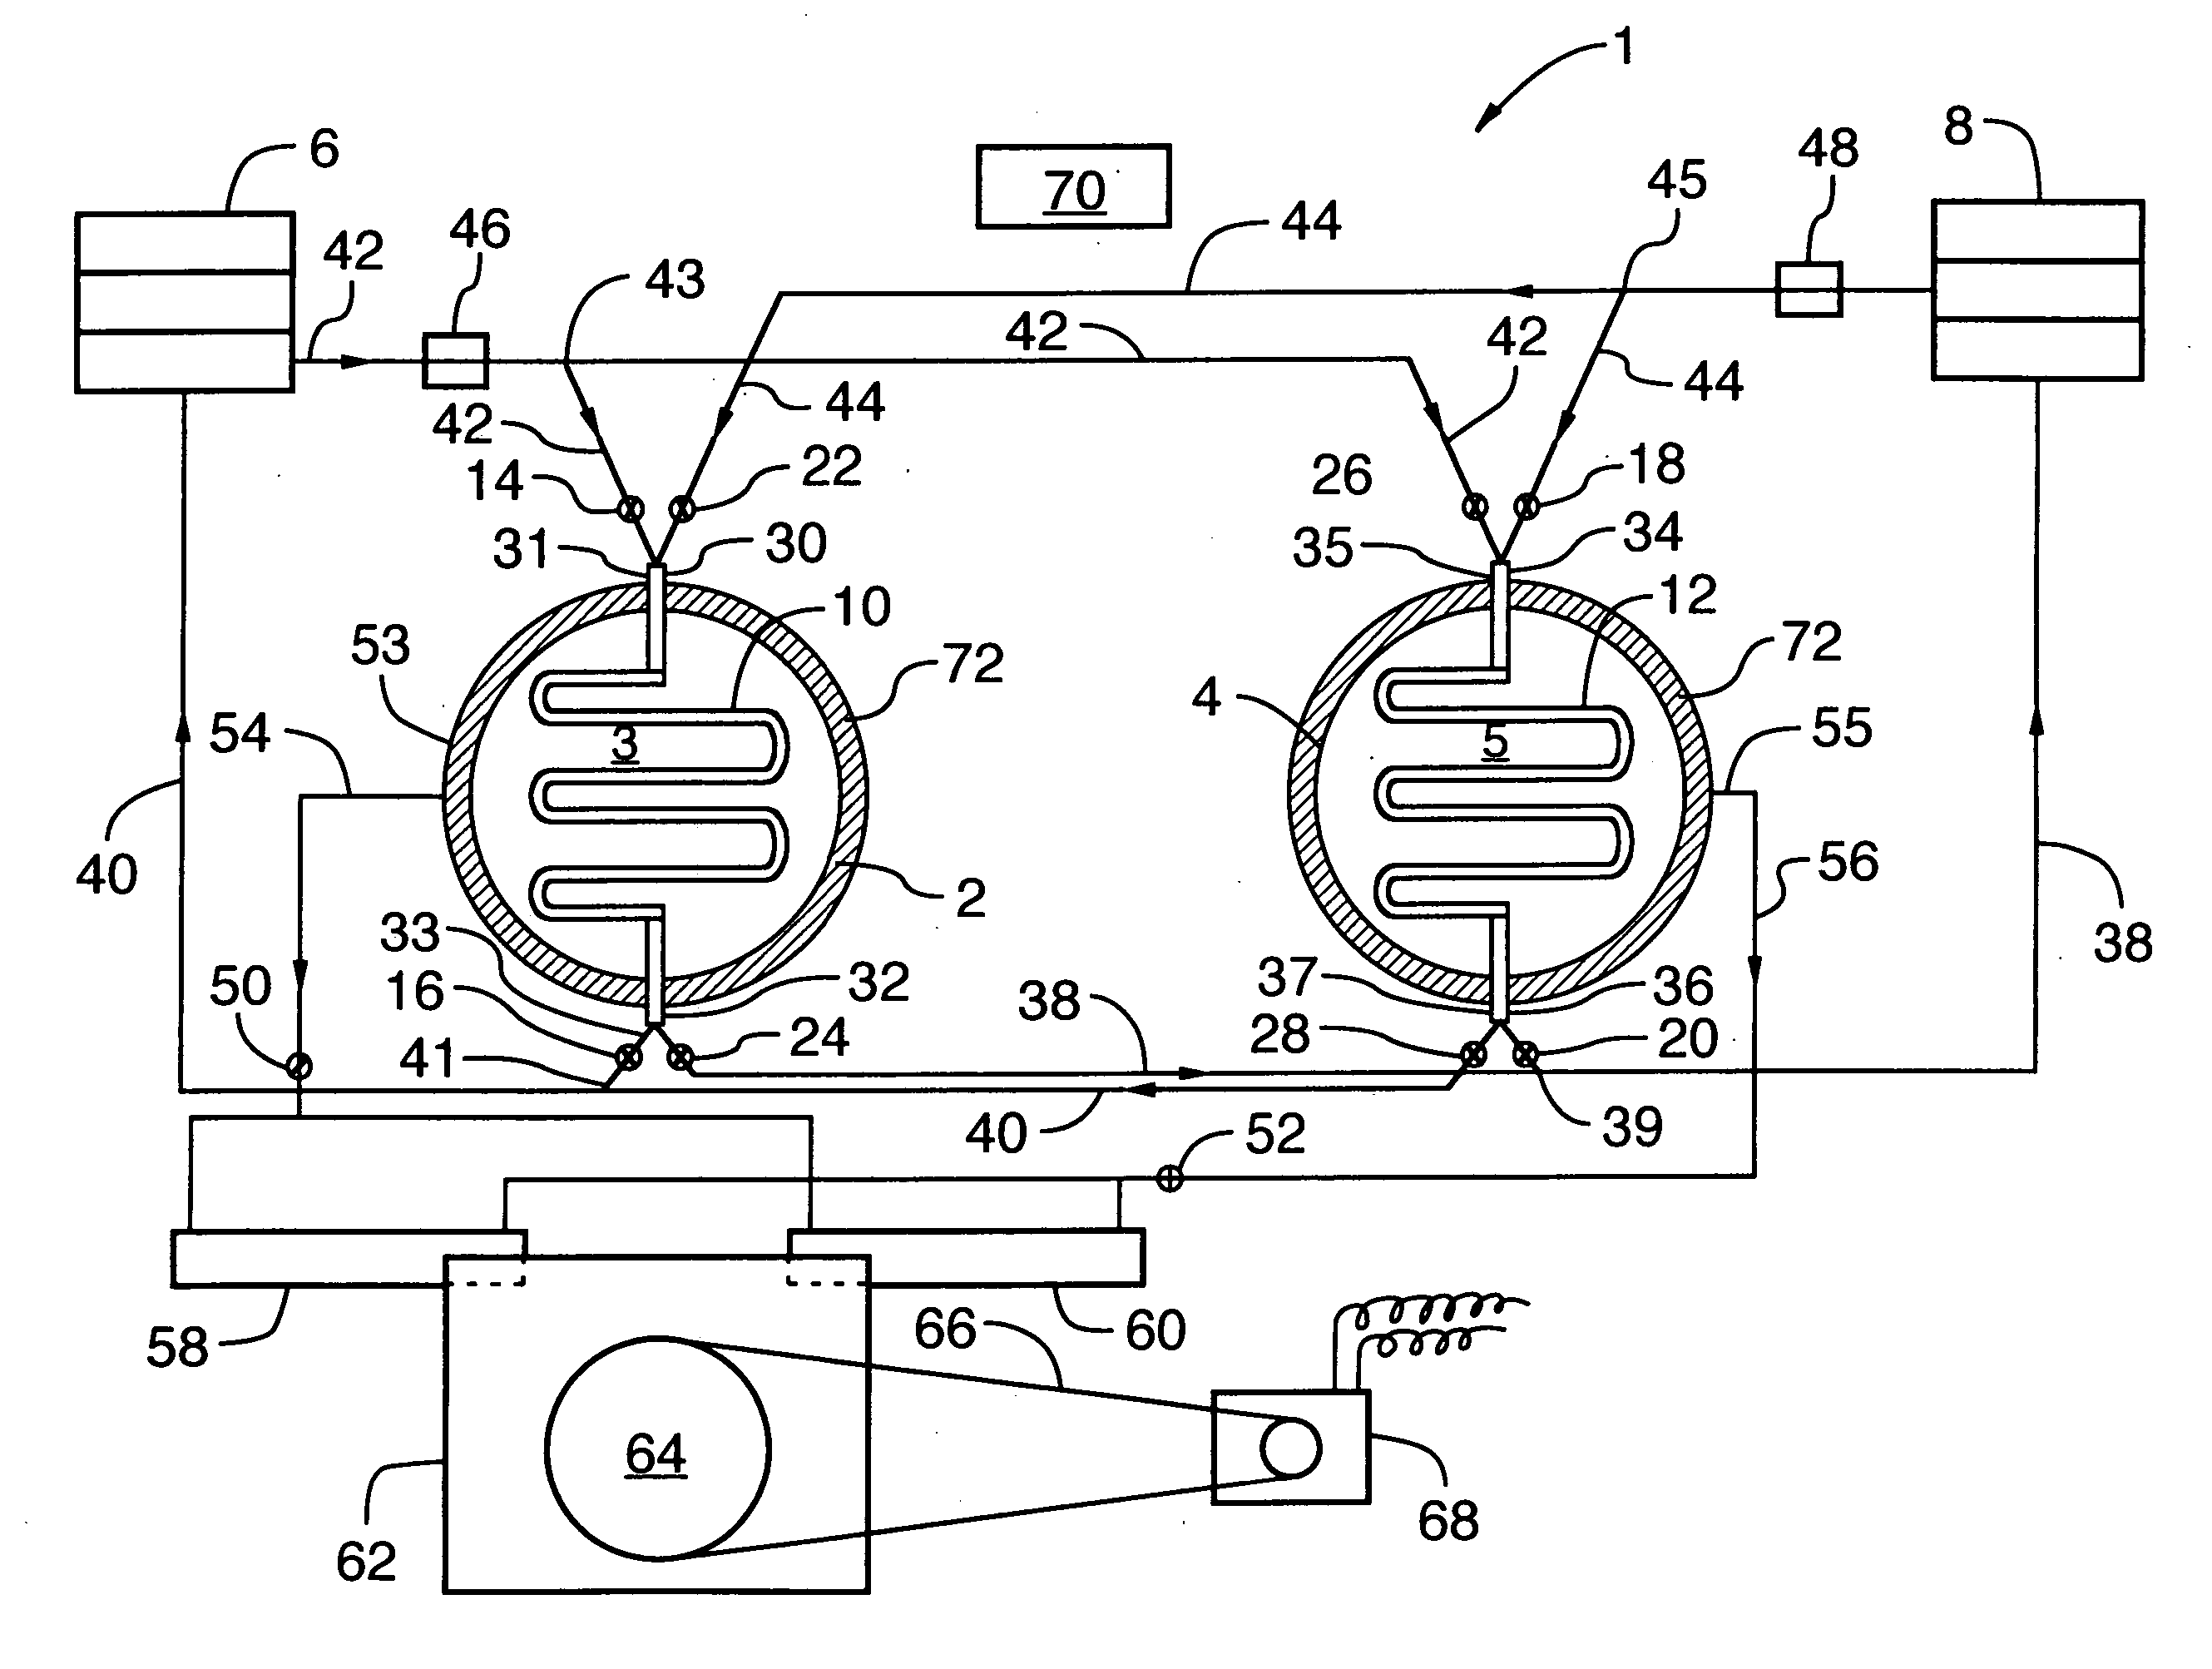 Thermal conversion device and process